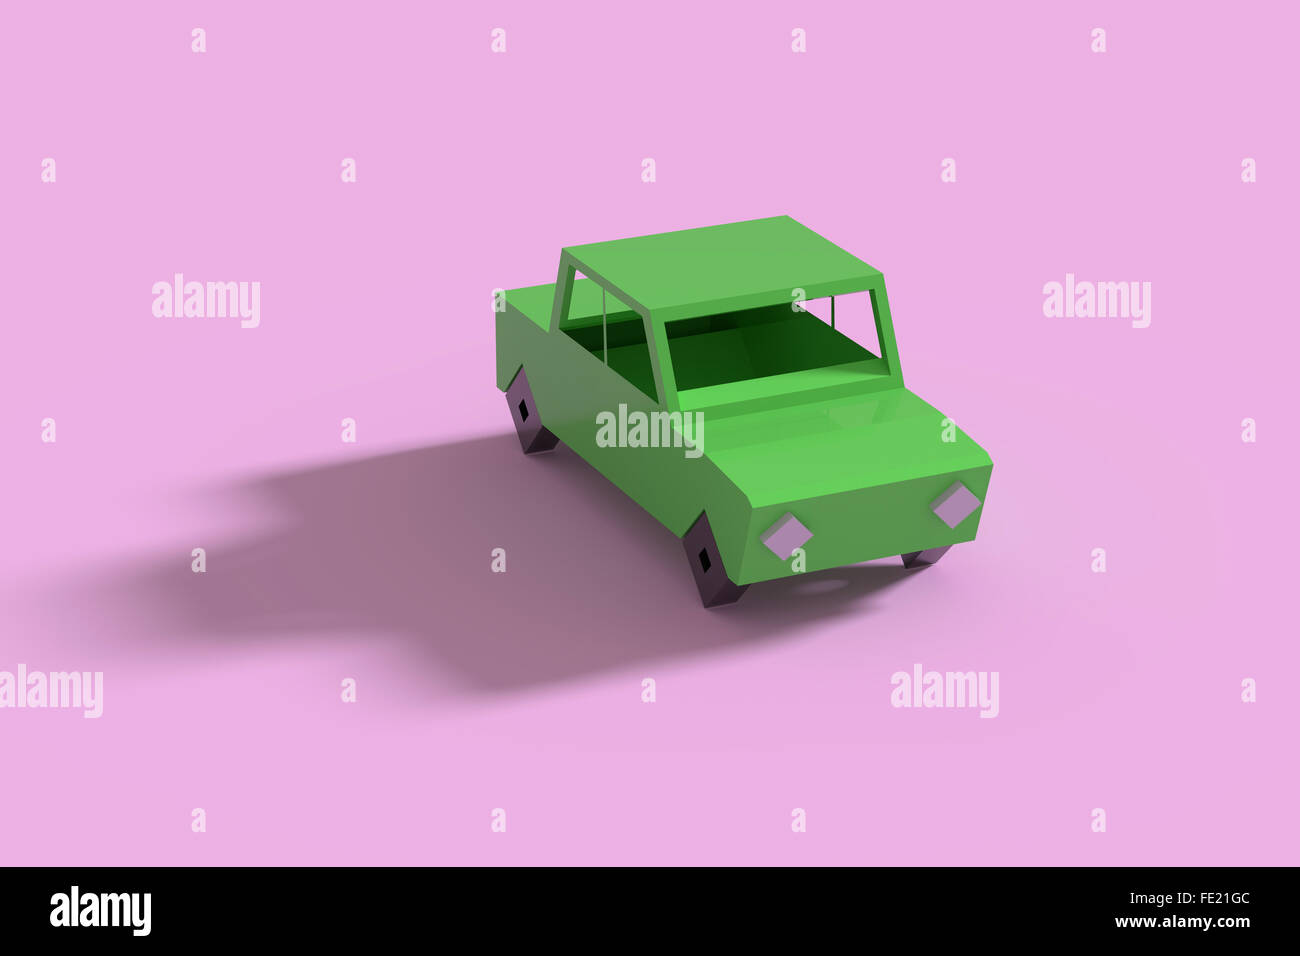 3d rendering in low poly of green car casting shadow on violet background. Stock Photo